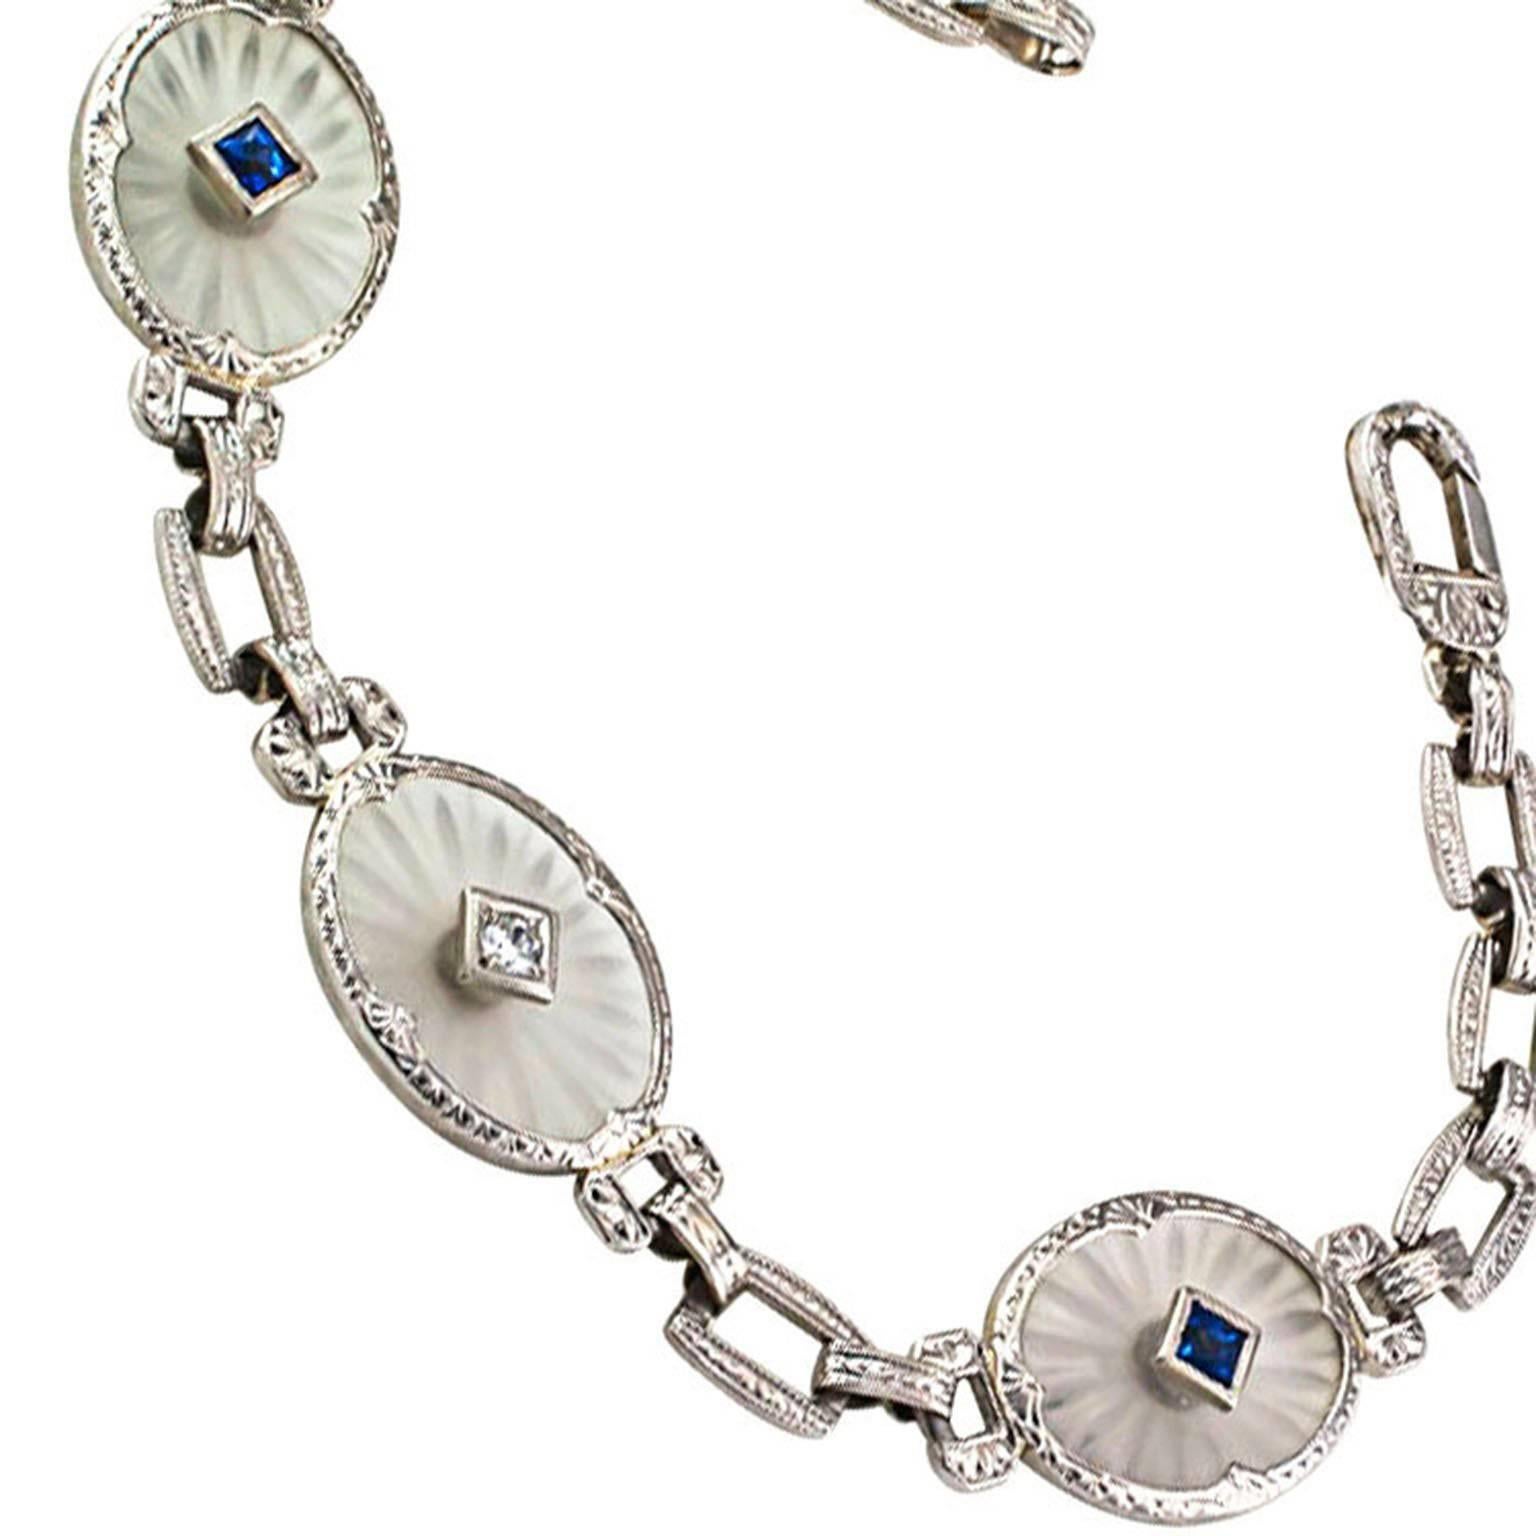 Rock Crystal Sapphire and Diamond Art Deco Bracelet

Rock crystal frosted on the top and carved on the reverse causes the three oval links to shine with a soft, almost out-of-this-world, mysterious glow, the central diamond weighing approximately